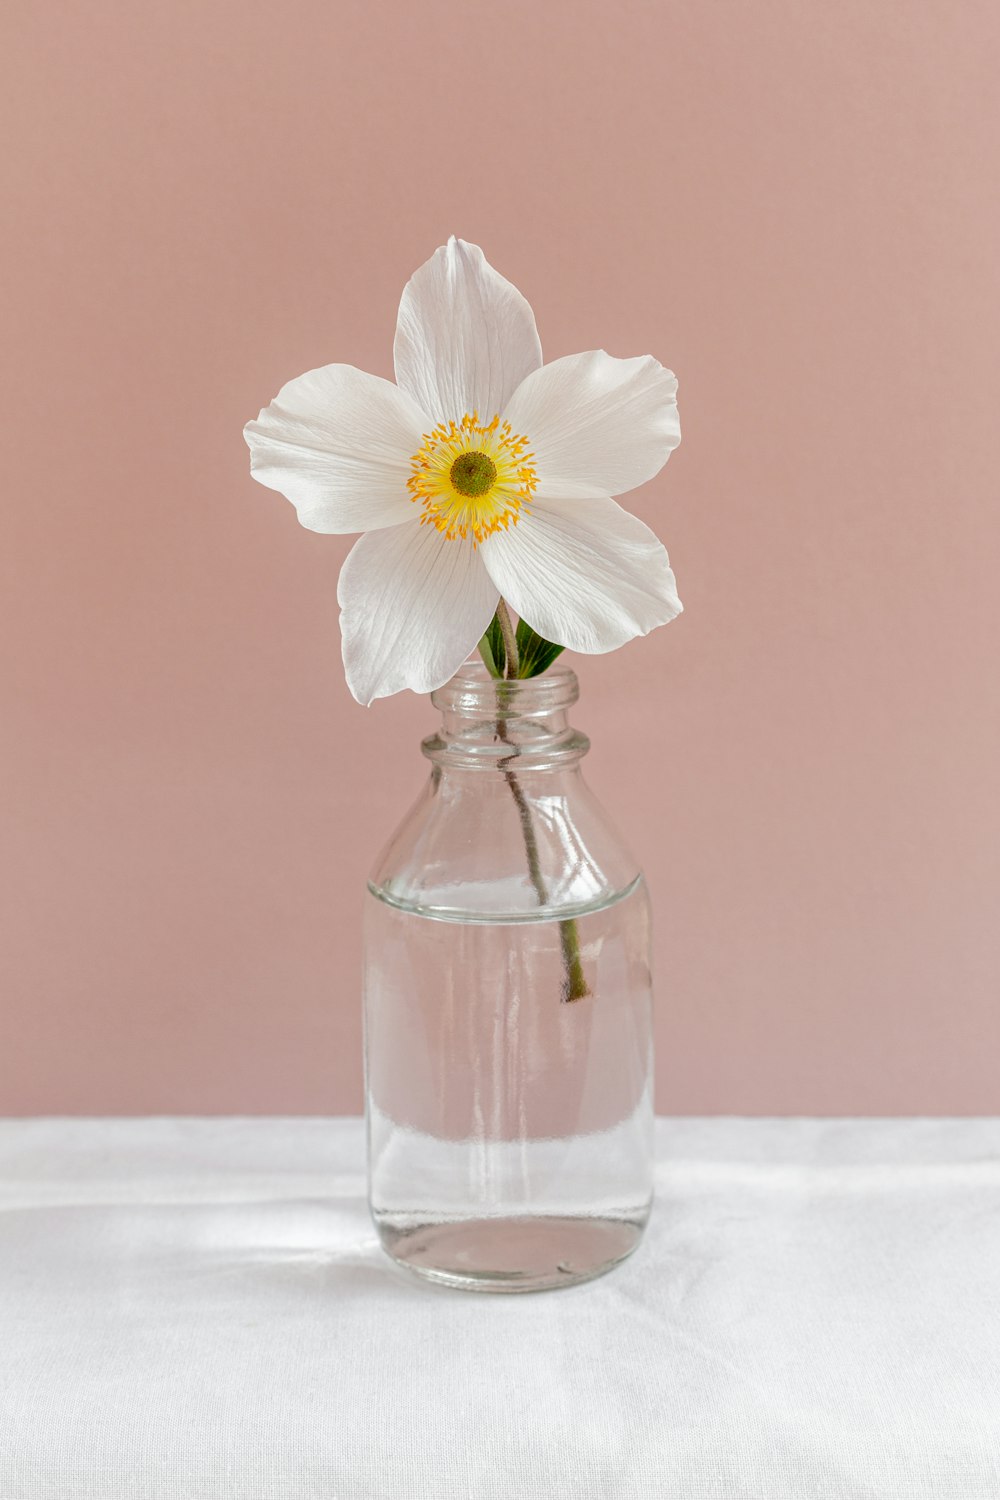 a single white flower in a clear glass vase